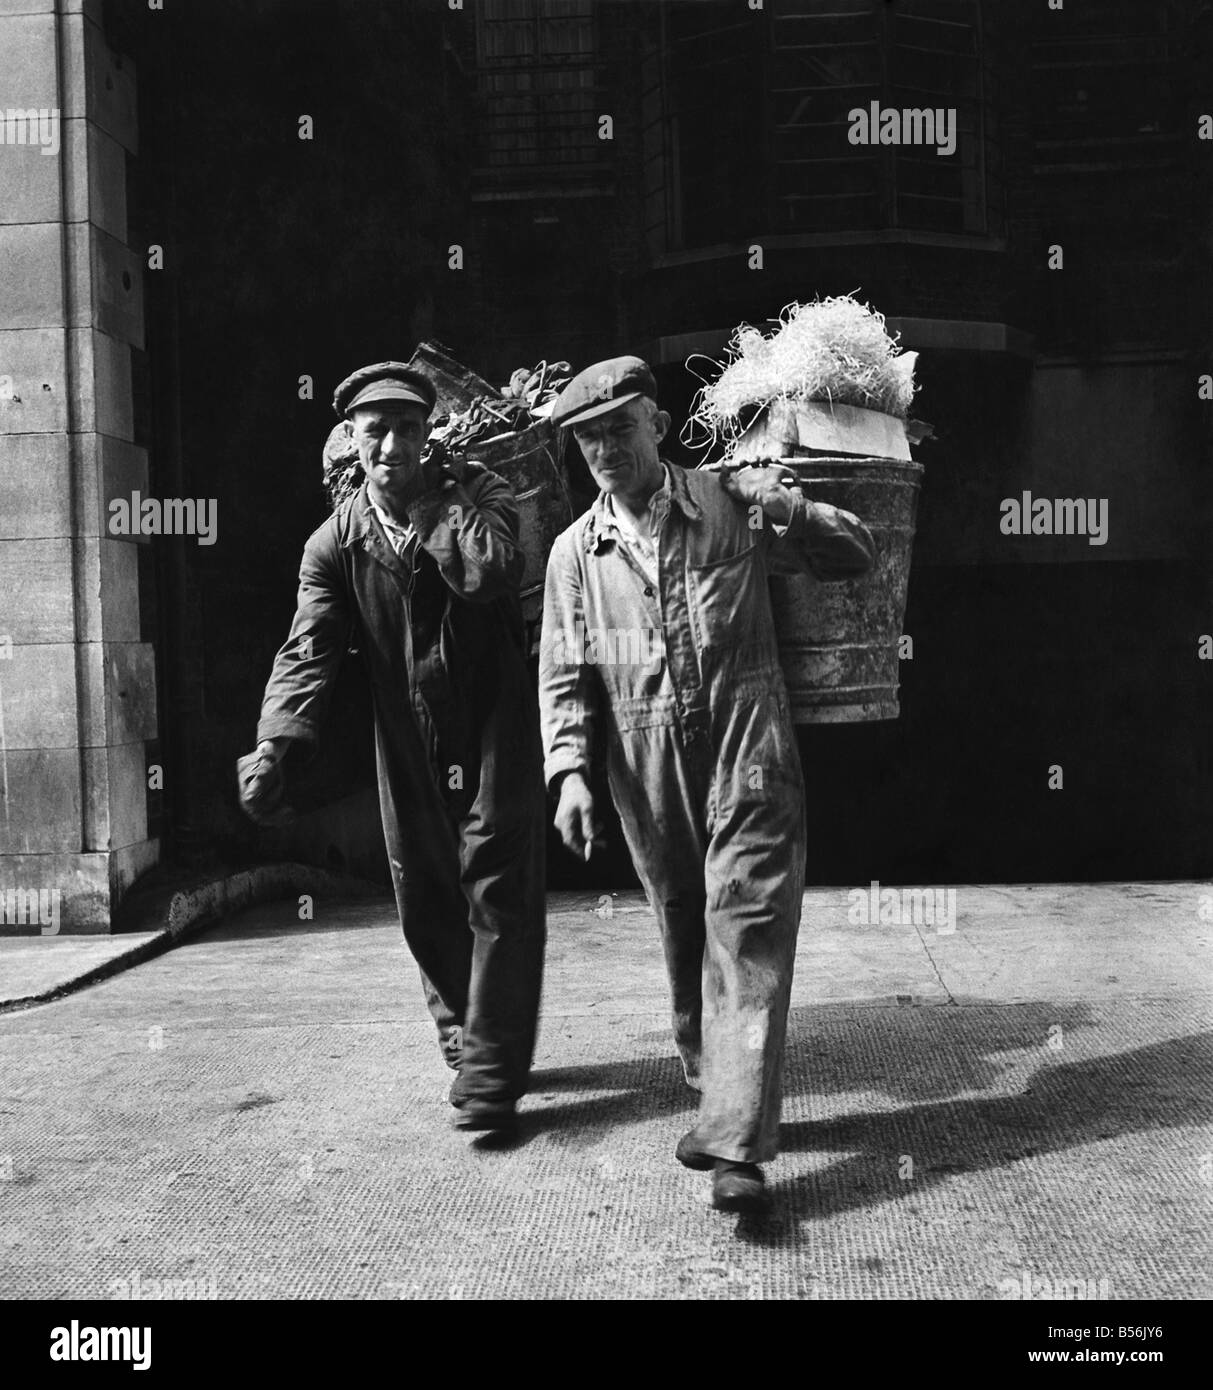 A Cockney earns his living: They've chosen the hard way to collect a weekly pay packet - two dustmen leave a block of London flats by the back way. August 1947 P009118 Stock Photo